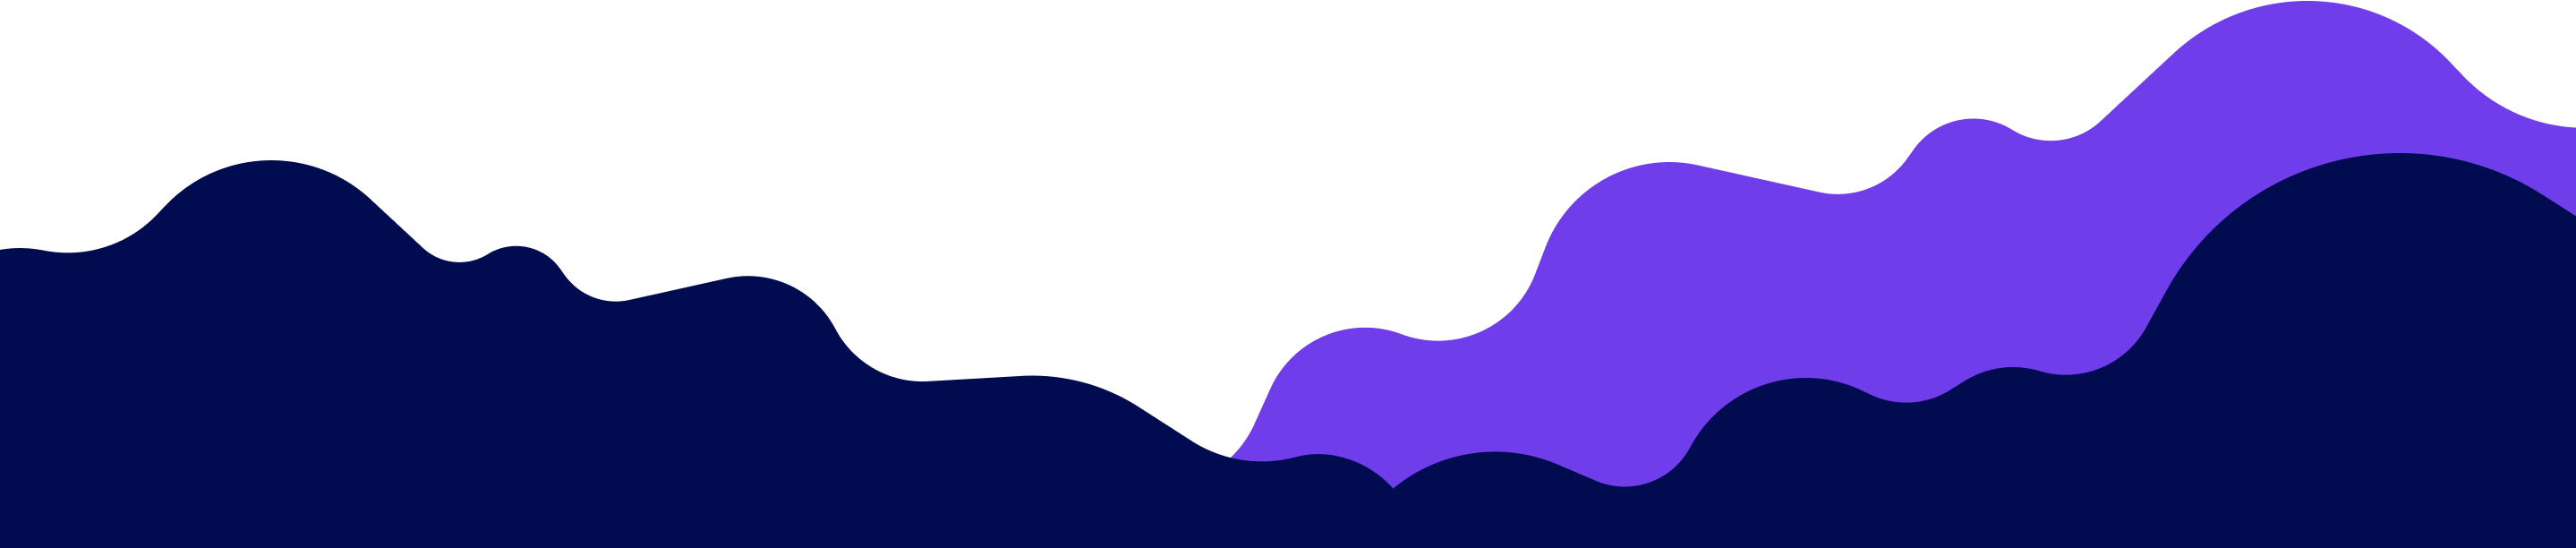 graphic of purple and navy clouds